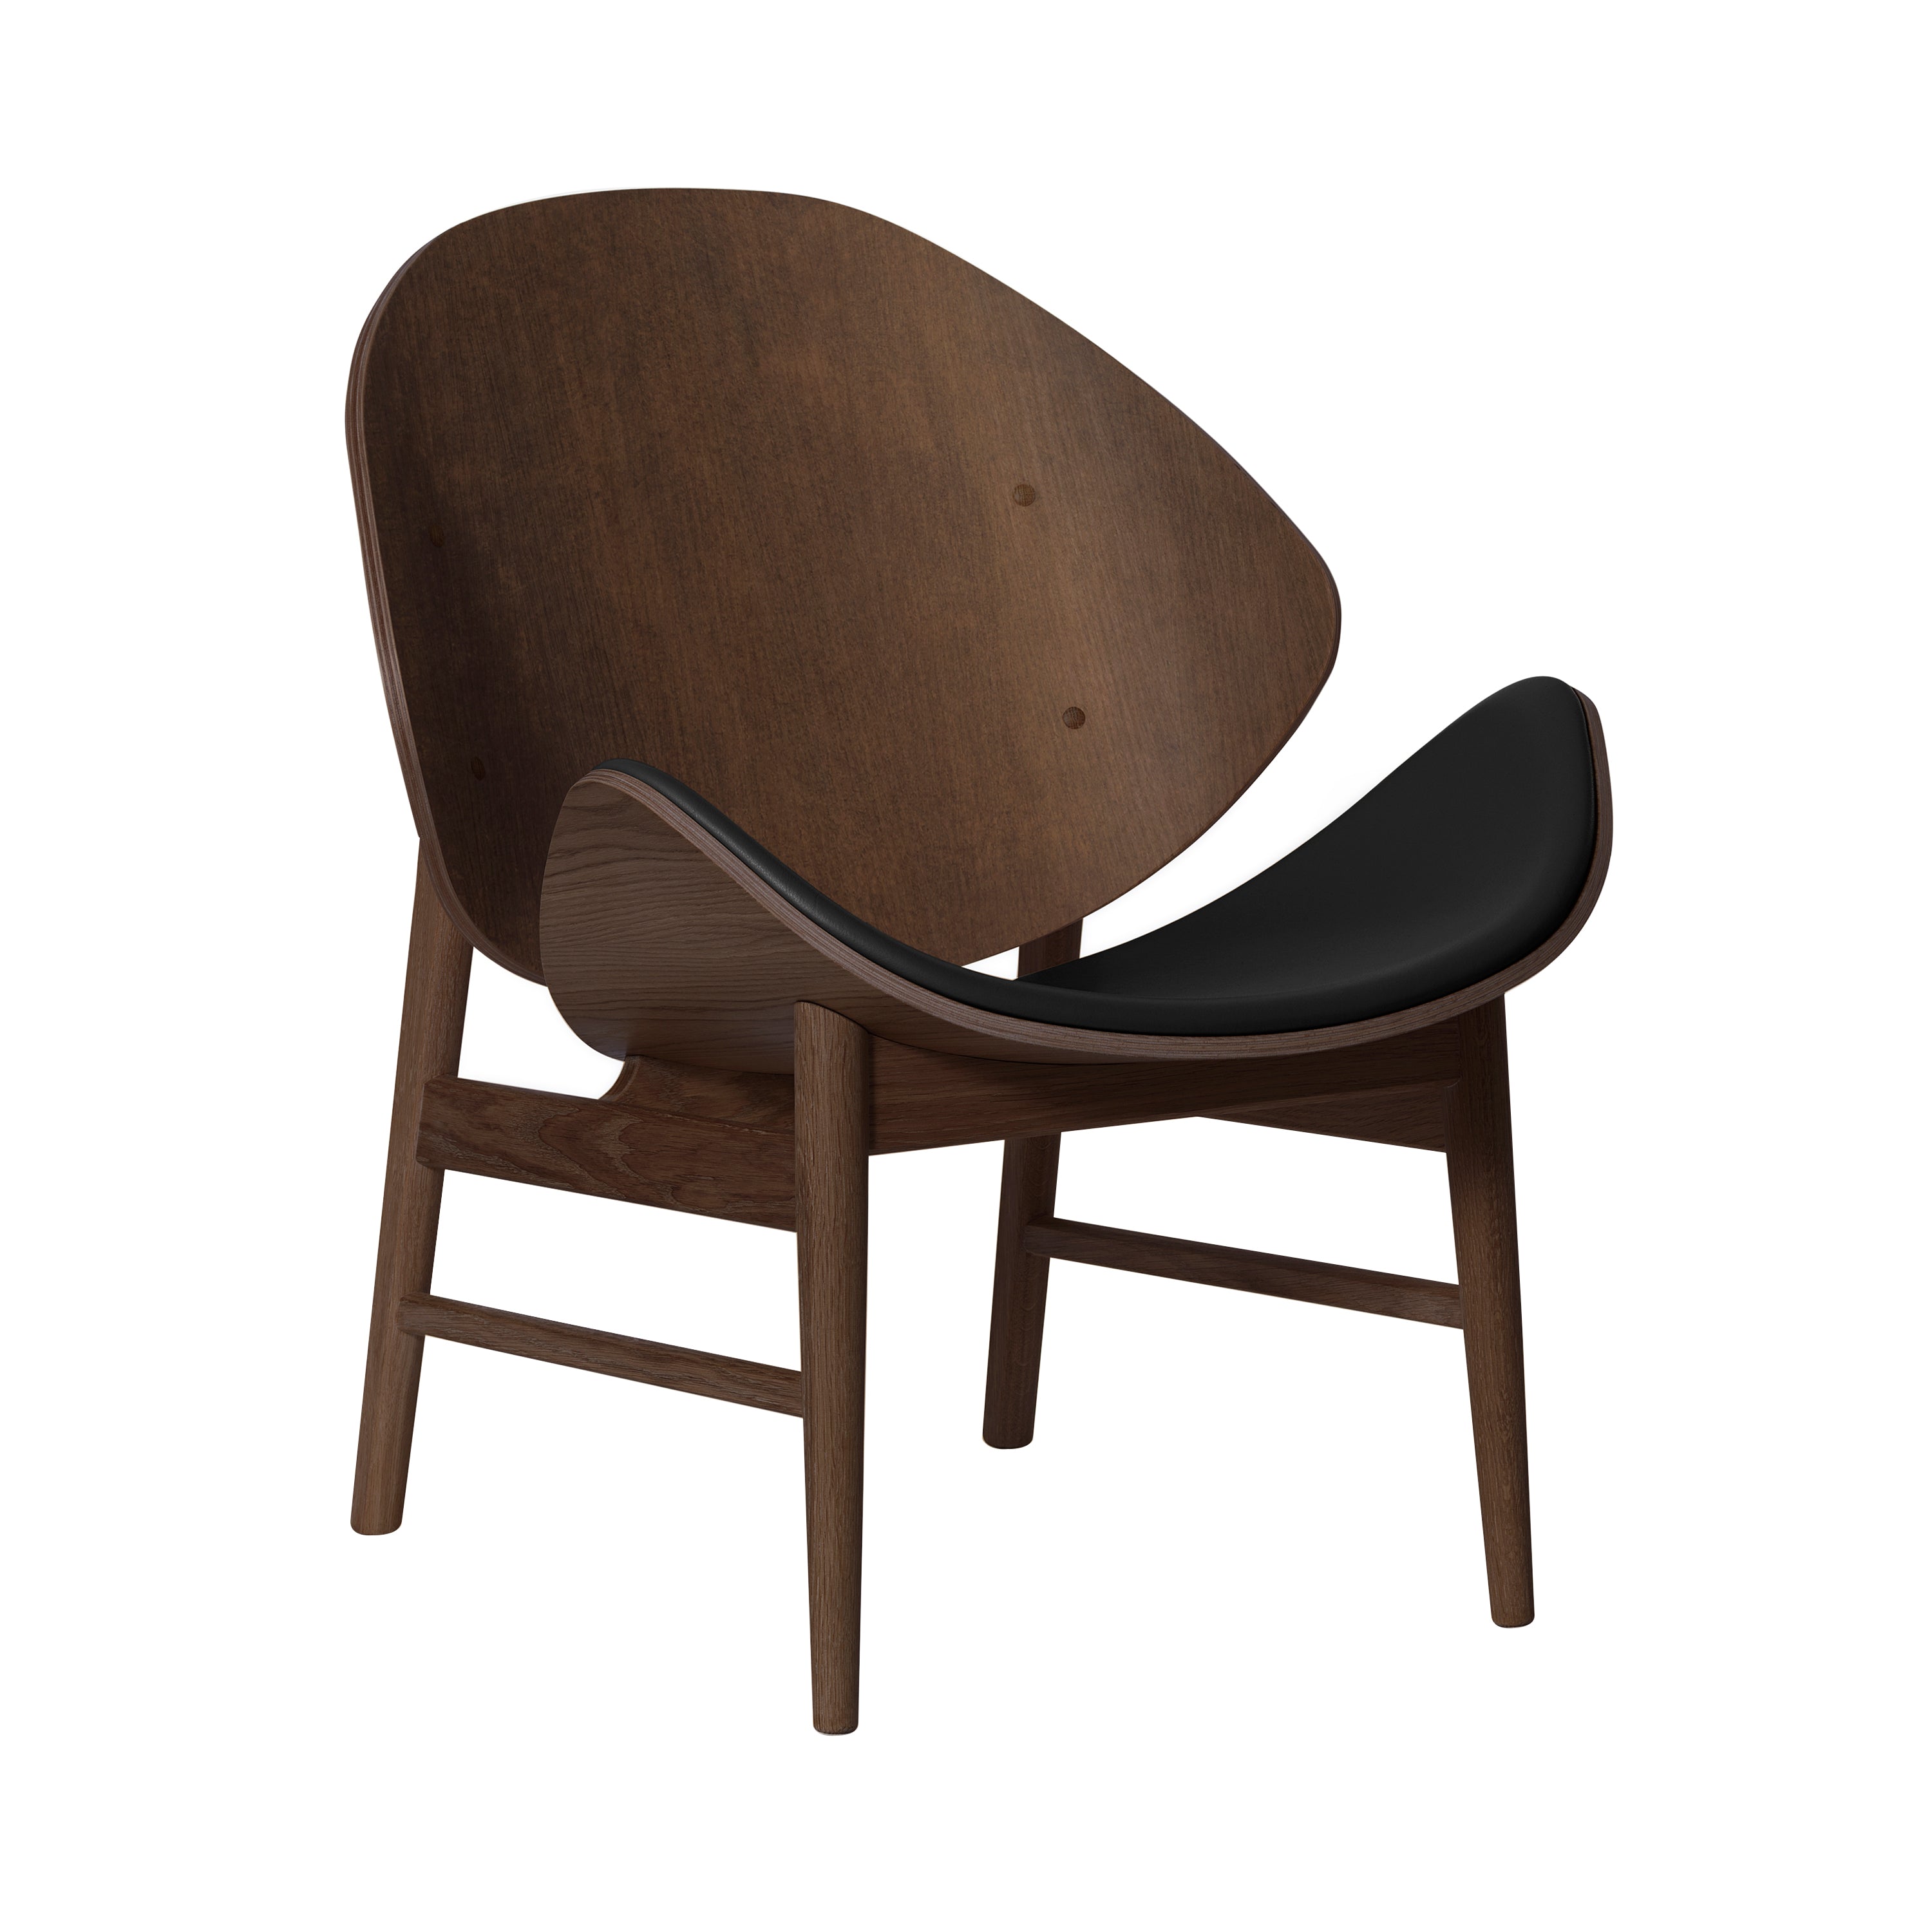 The Orange Lounge Chair: Seat Upholstered + Smoked Oak + Challenger Black